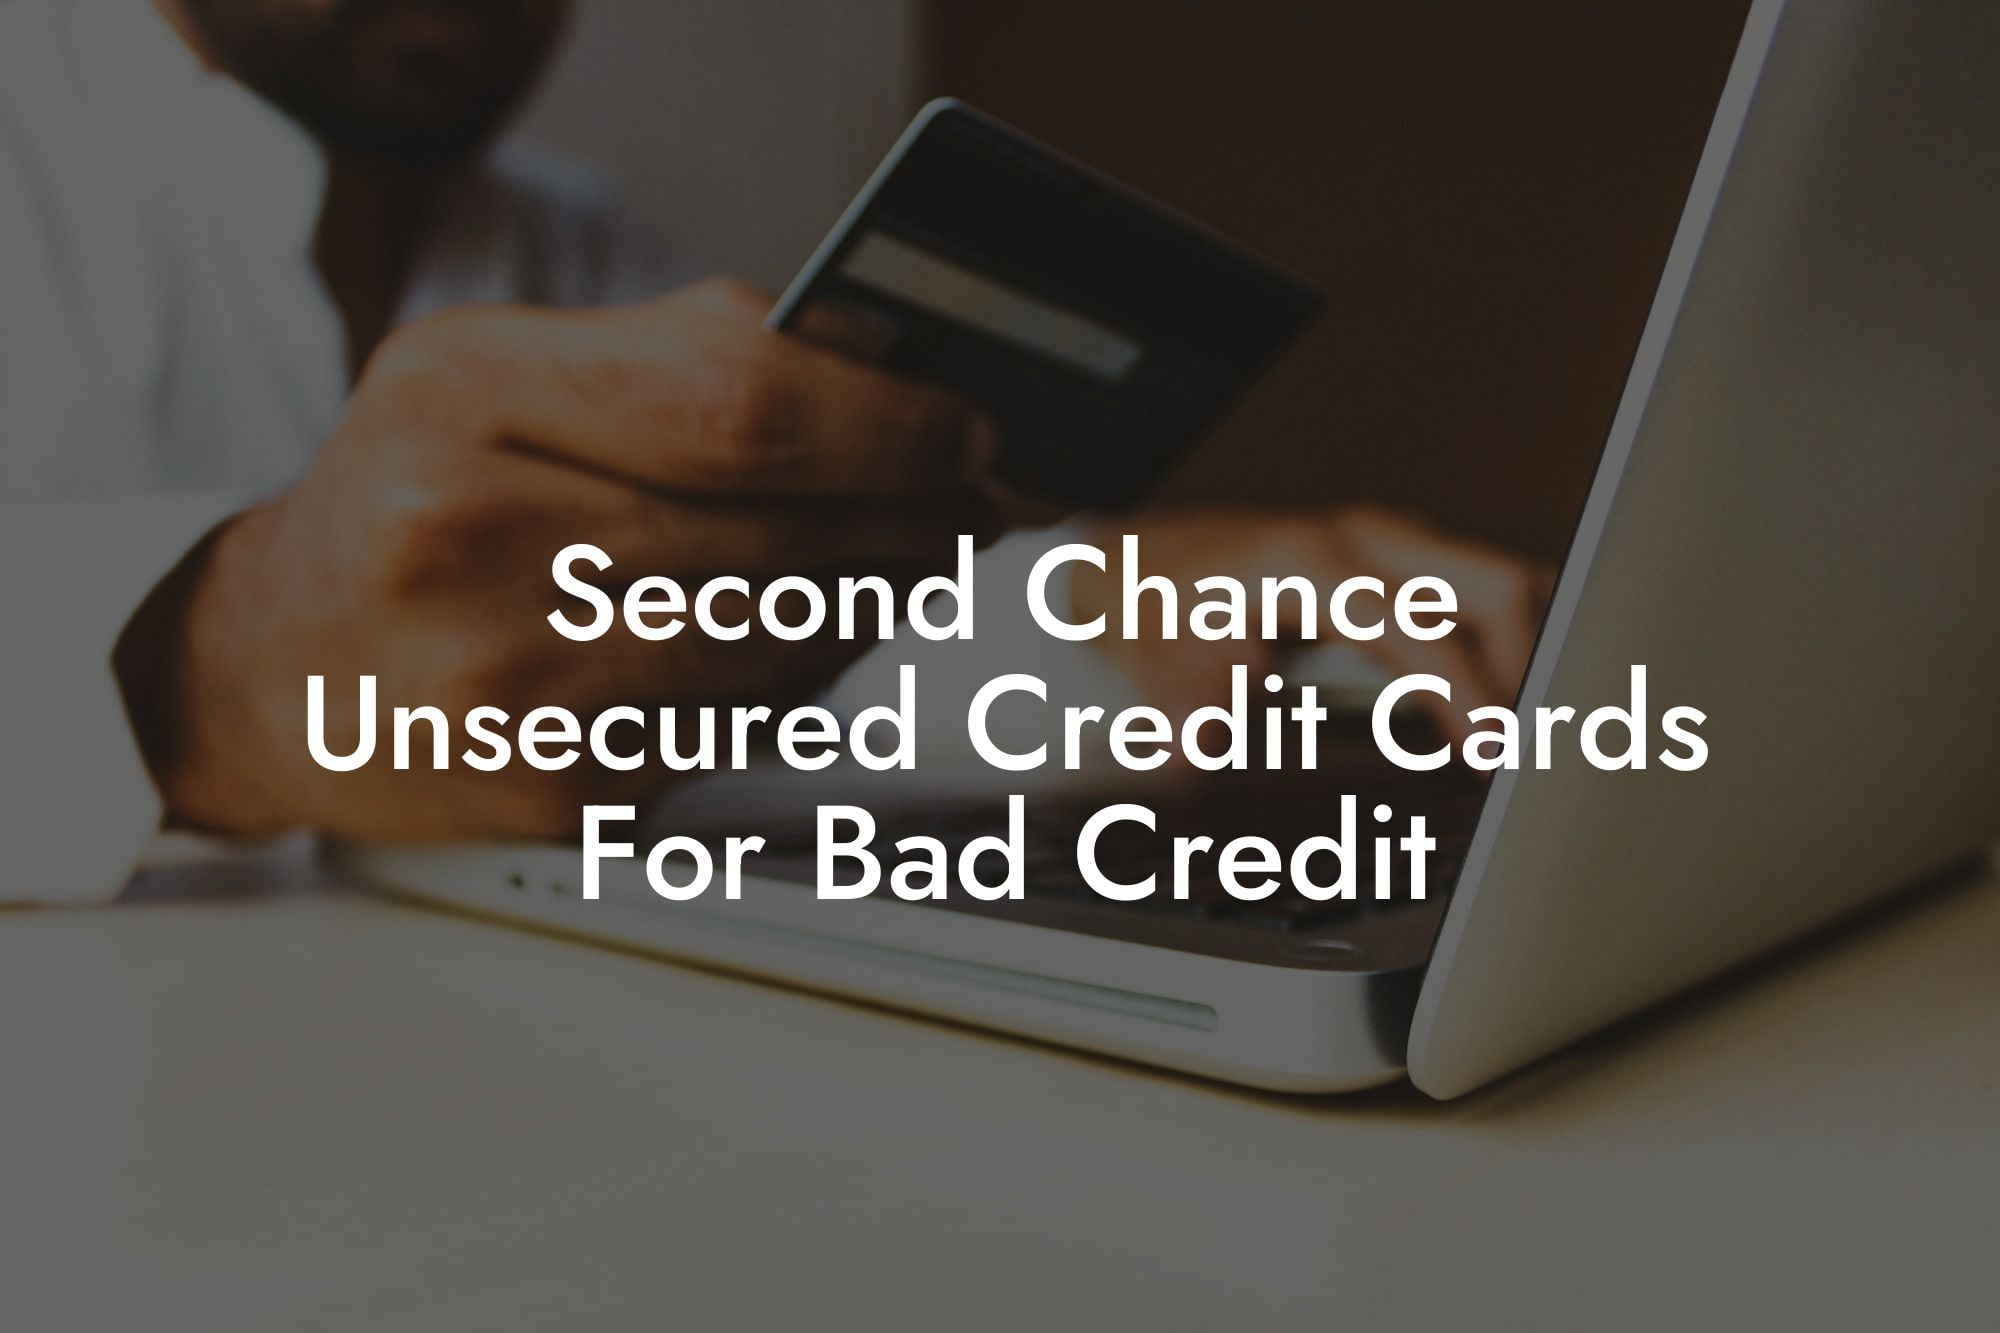 Second Chance Unsecured Credit Cards For Bad Credit